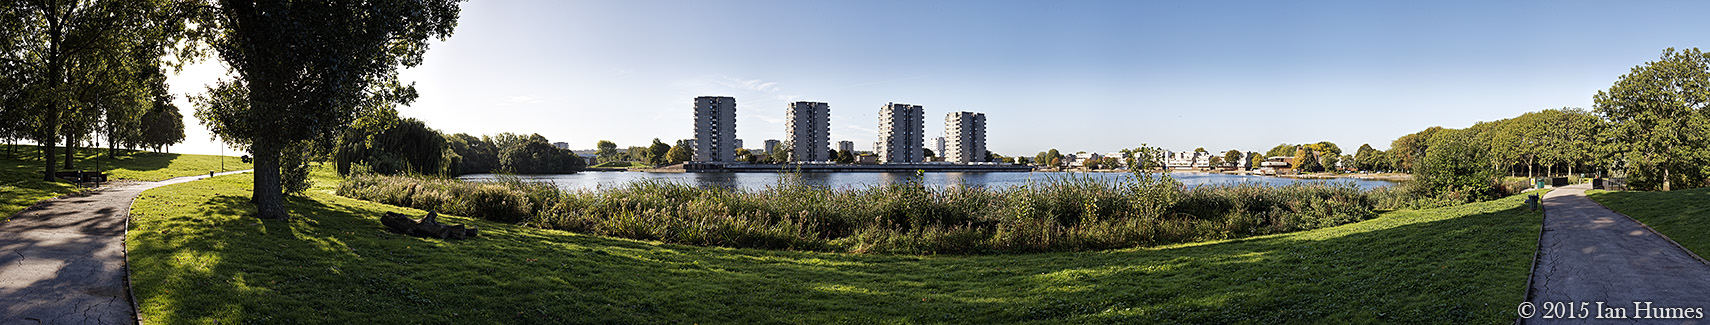 Southmere - Thamesmead